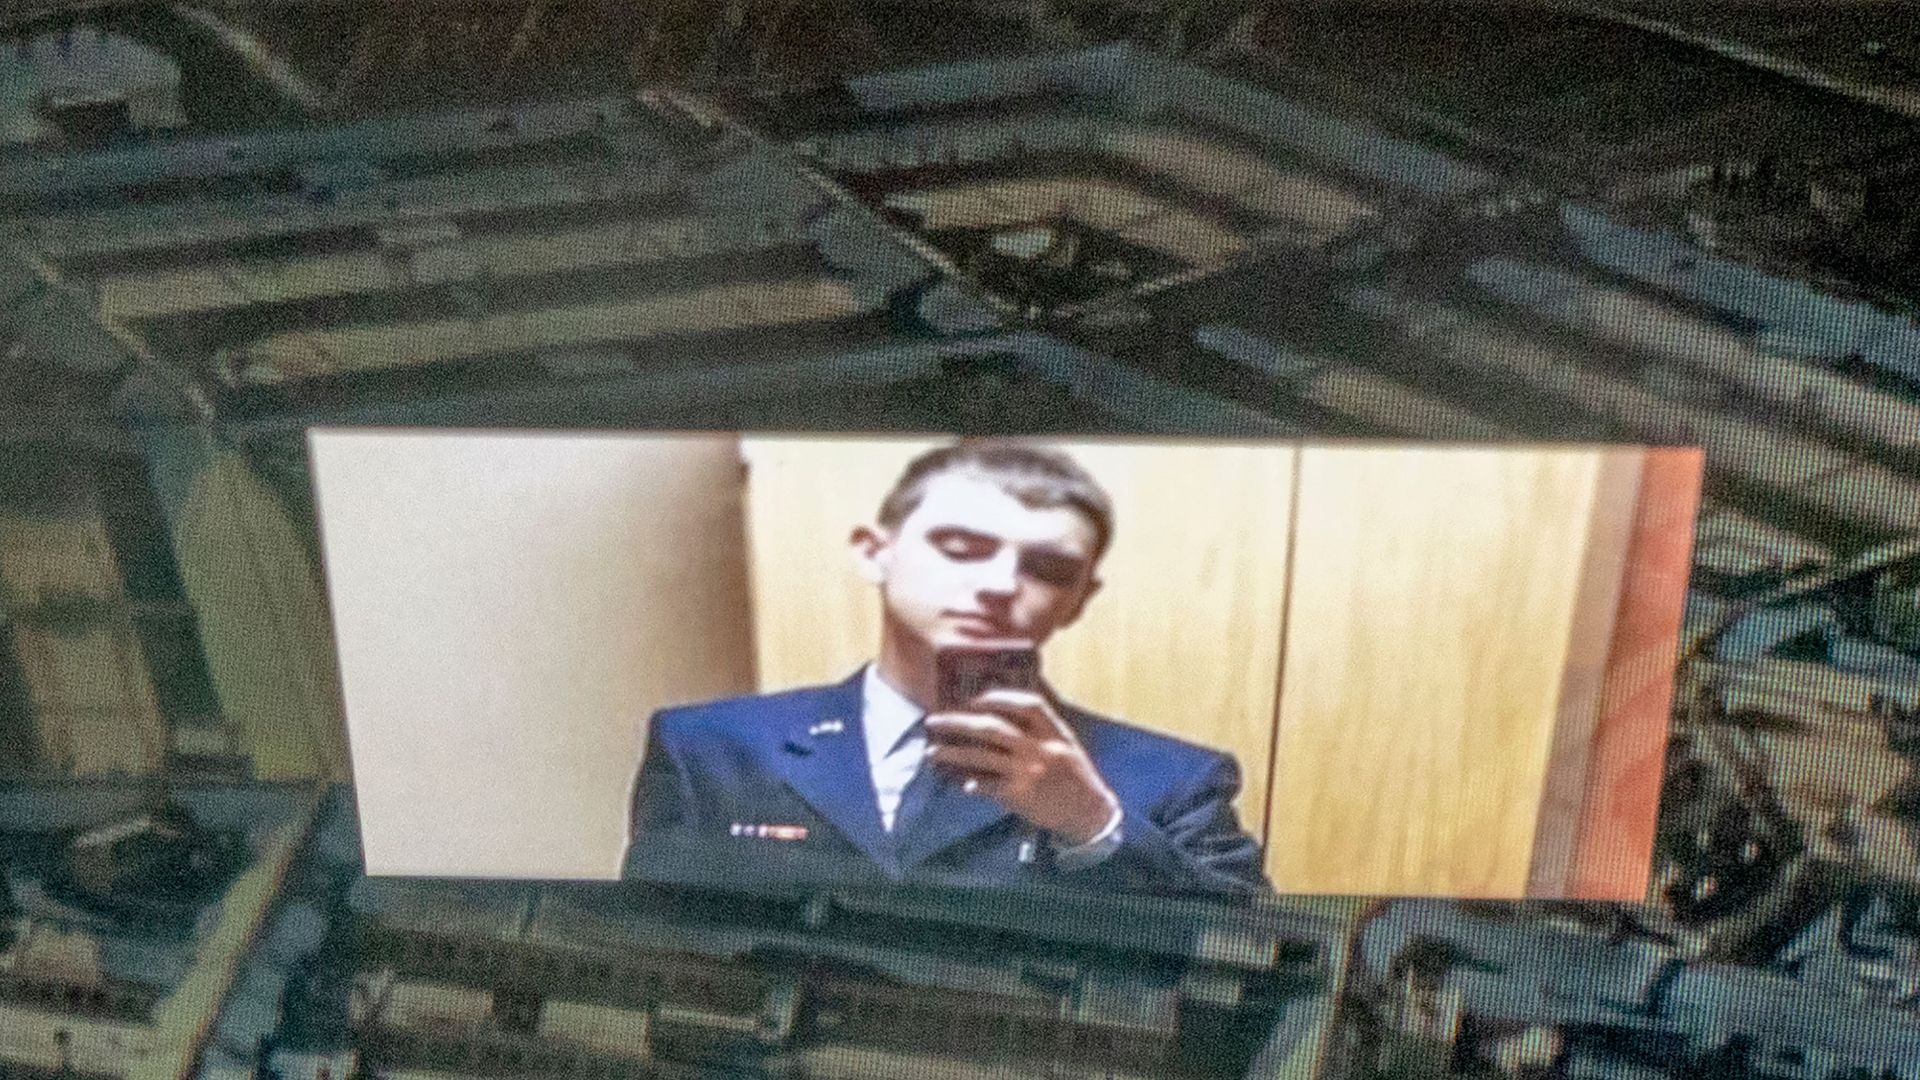 A photo of Jack Teixeira reflected on an image of the Pentagon building